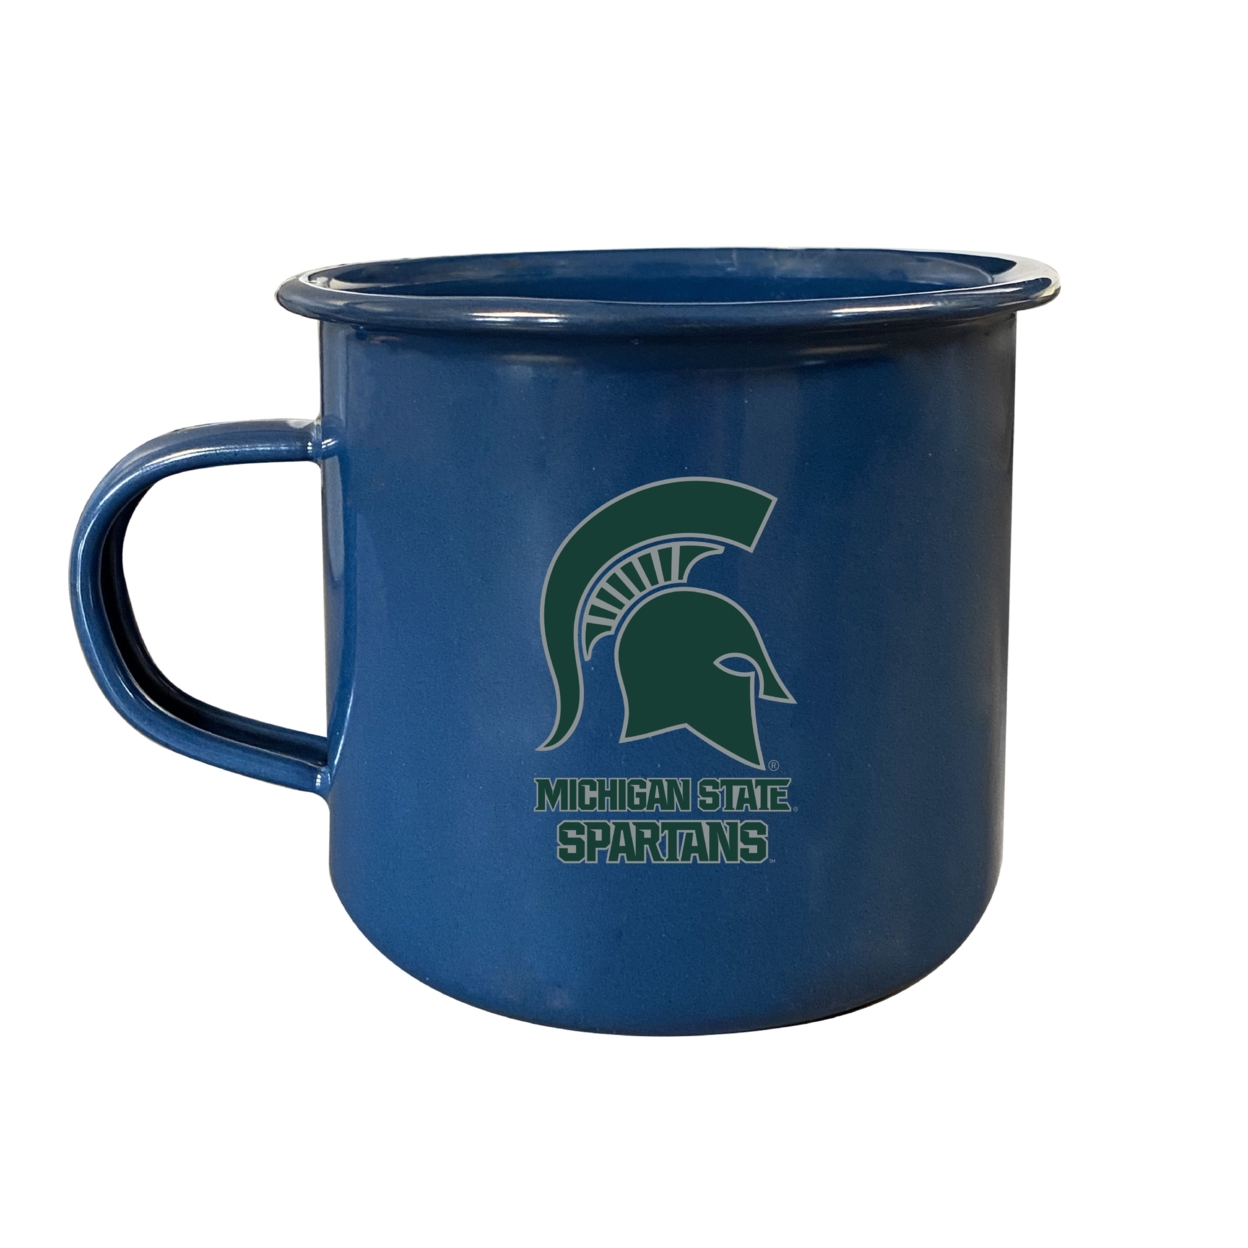 Michigan State Spartans Tin Camper Coffee Mug - Choose Your Color - White